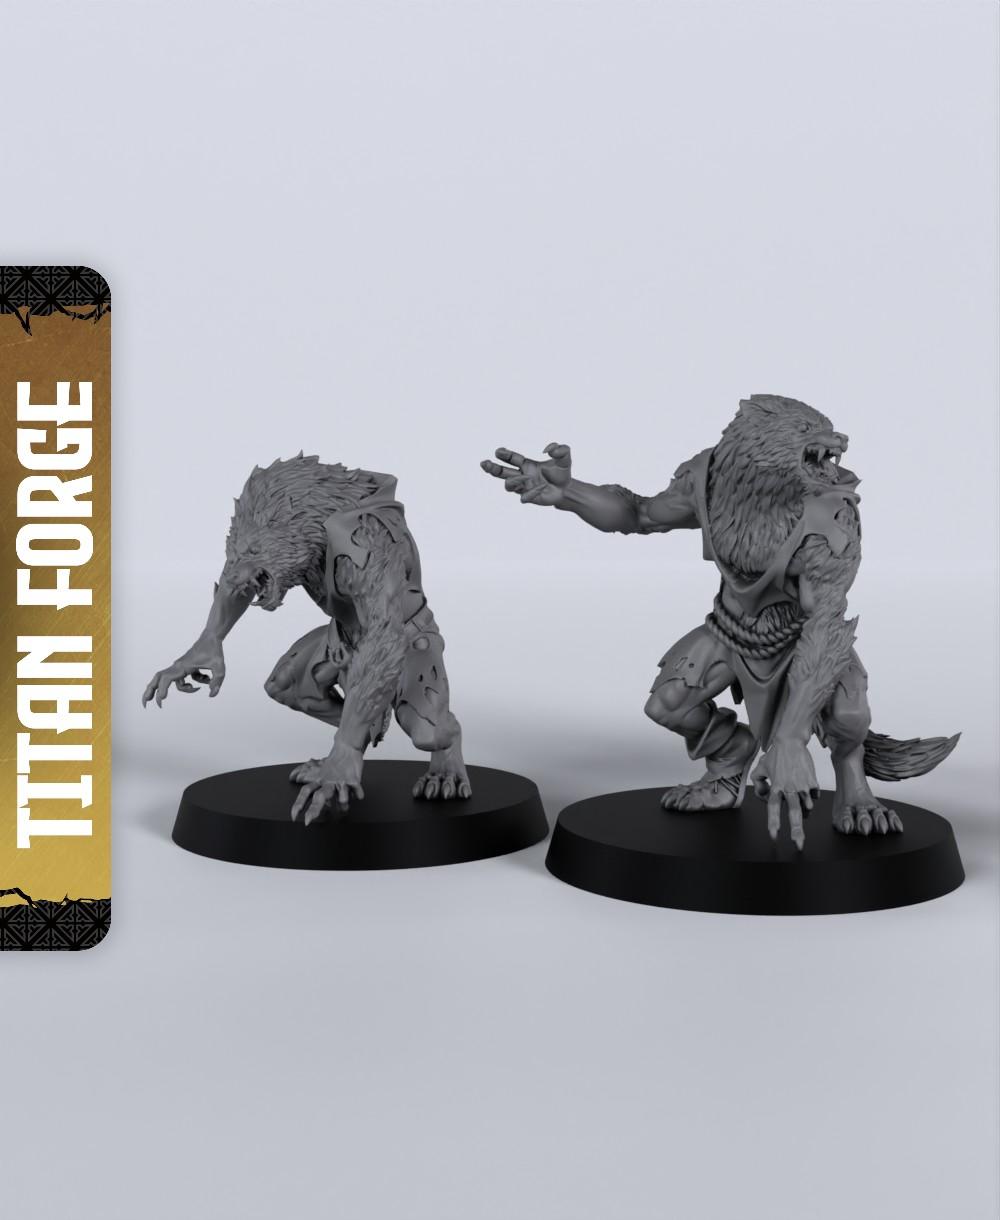 Werewolves - With Free Dragon Warhammer - 5e DnD Inspired for RPG and Wargamers 3d model